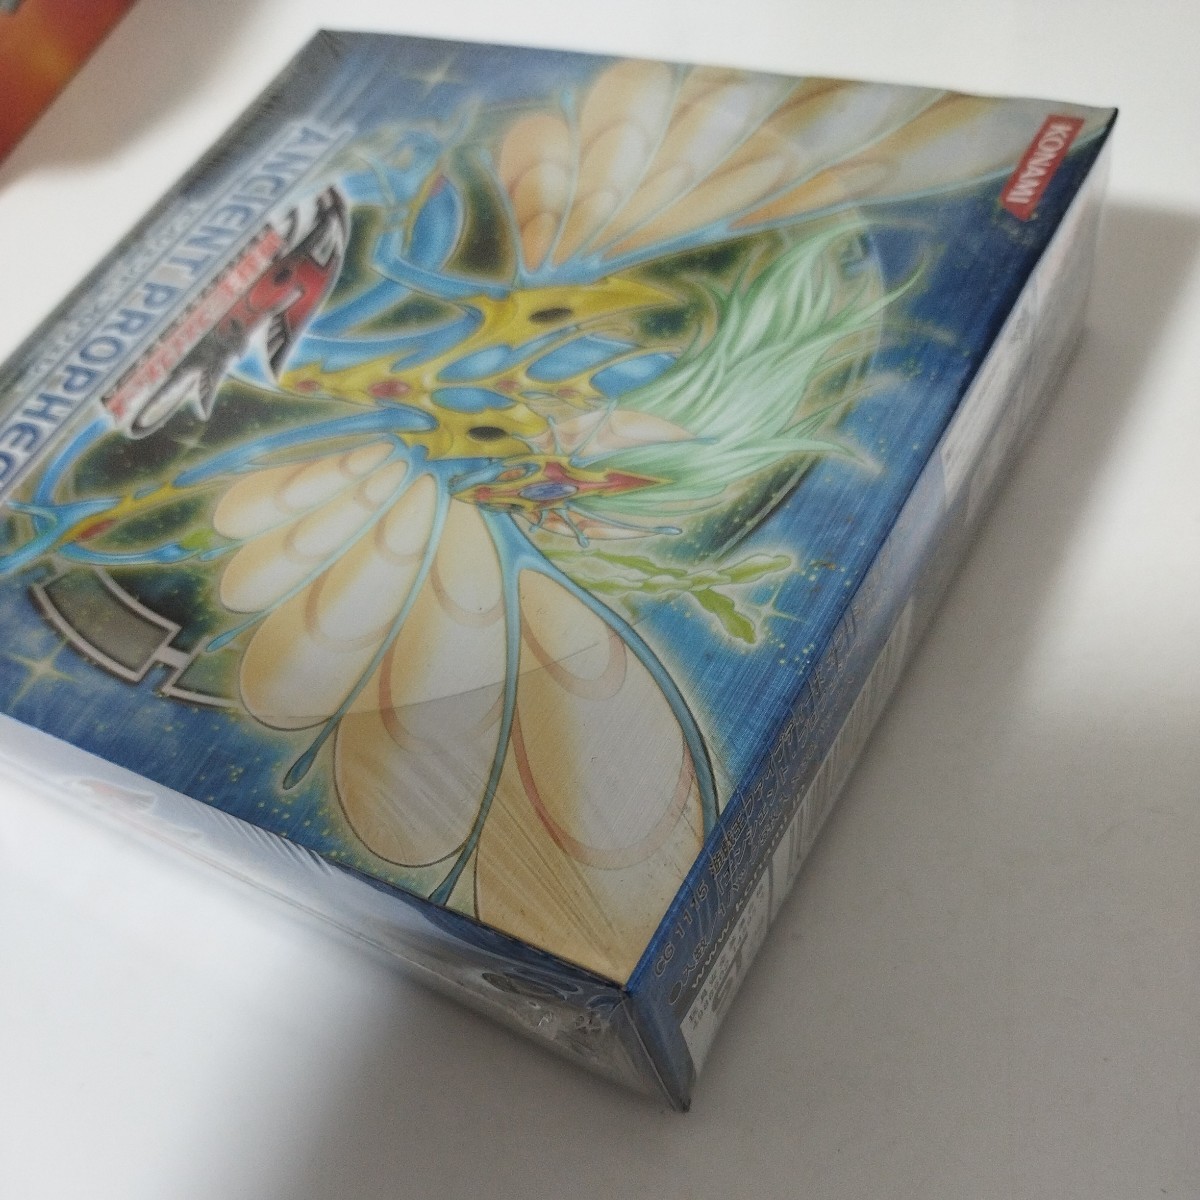  Yugioh unopened booster box 1 piece enshento* Prophecy 